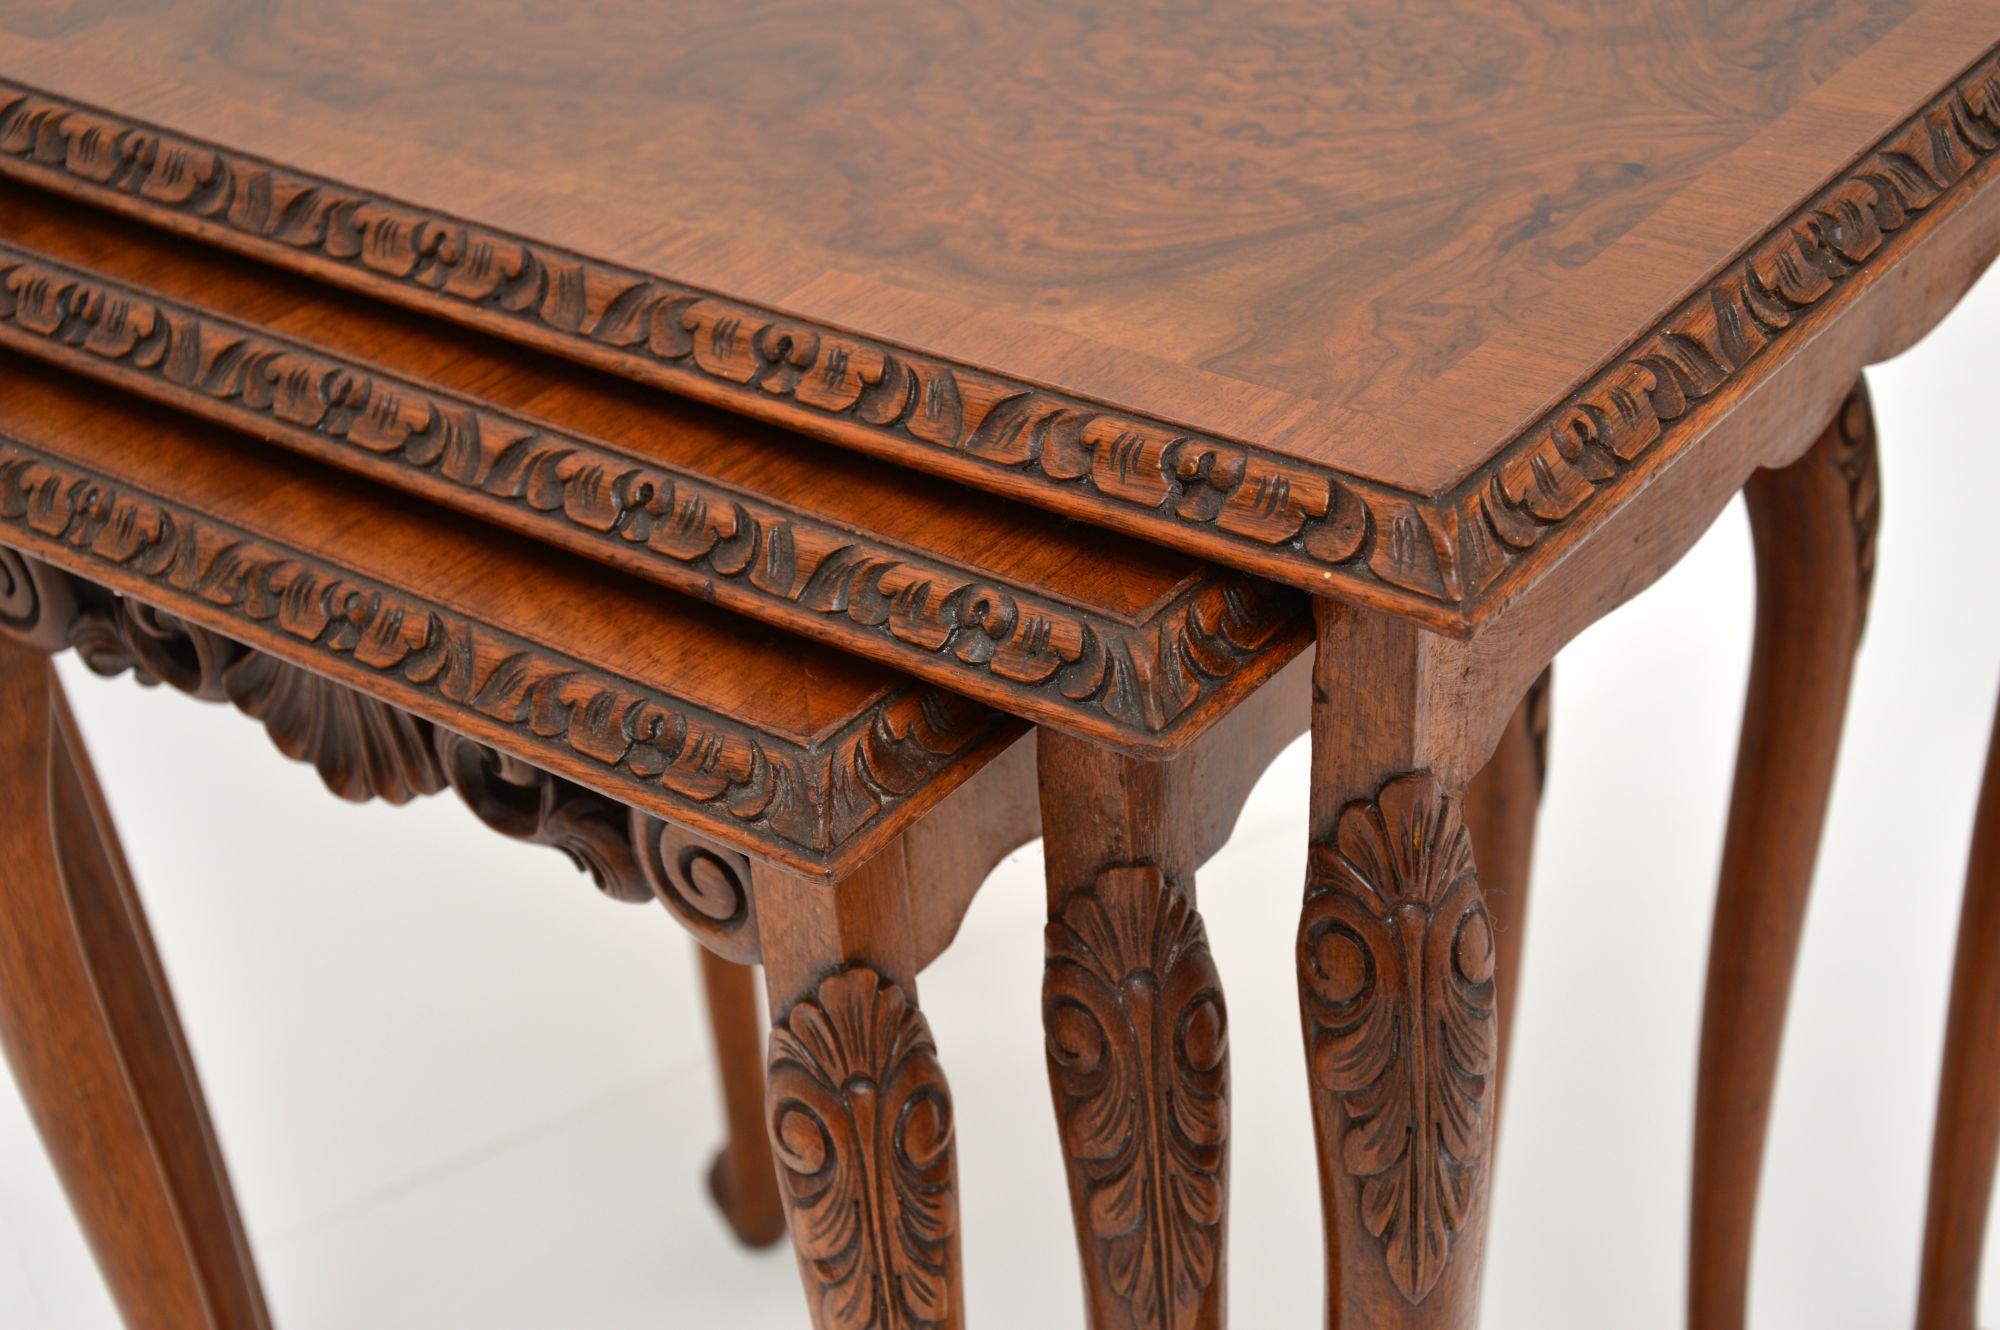 A beautiful and useful nest of tables in the antique Queen Anne style. They date from circa 1920s-1930s period.

These are extremely fine quality, with amazing carving, and gorgeous burr walnut grain patterns.

We have had these recently French